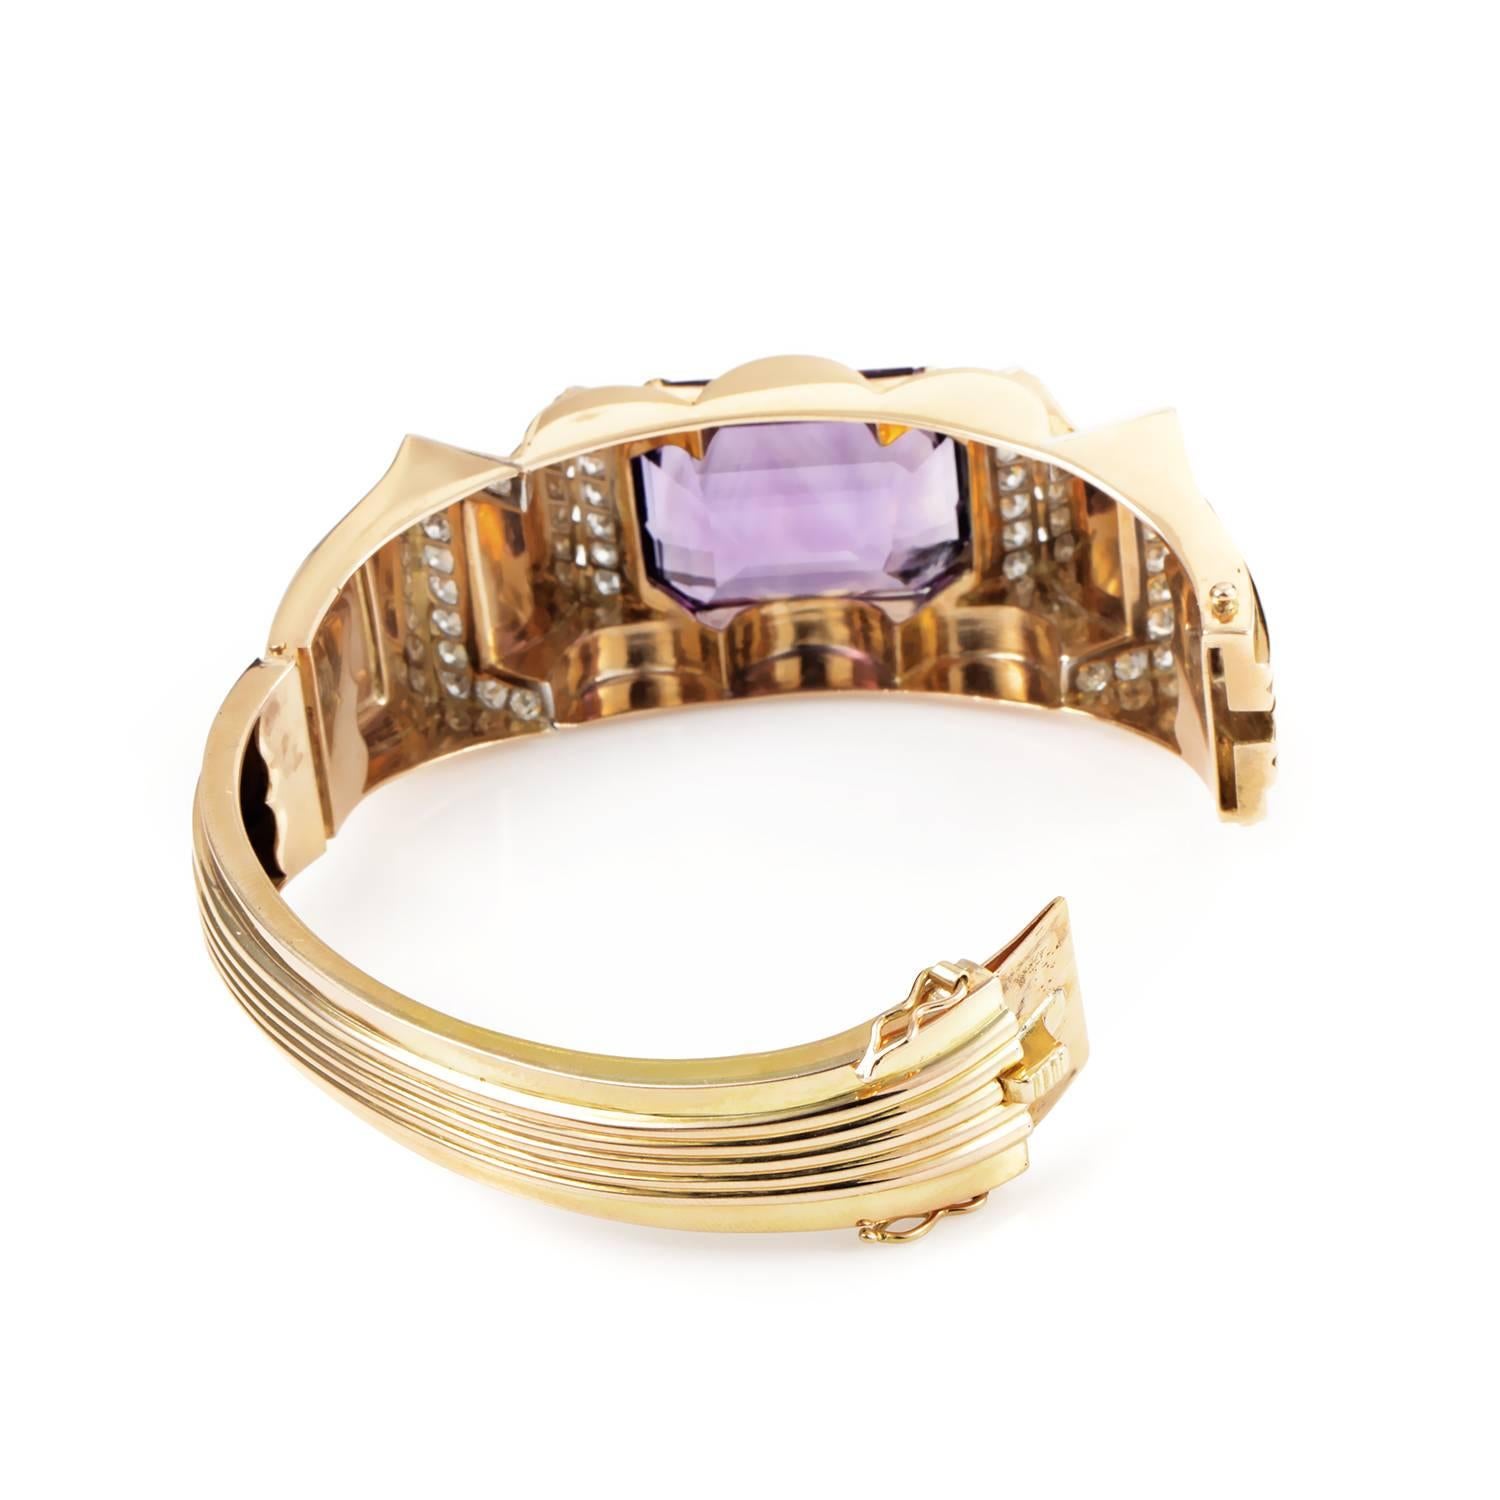 A magnificent sight of antique beauty and classic luxury, this fabulous bracelet is made of radiant 18K yellow gold and embellished with approximately 2.75 carats of diamonds while an astonishing amethyst weighing 40.00 carats sits gloriously on top.